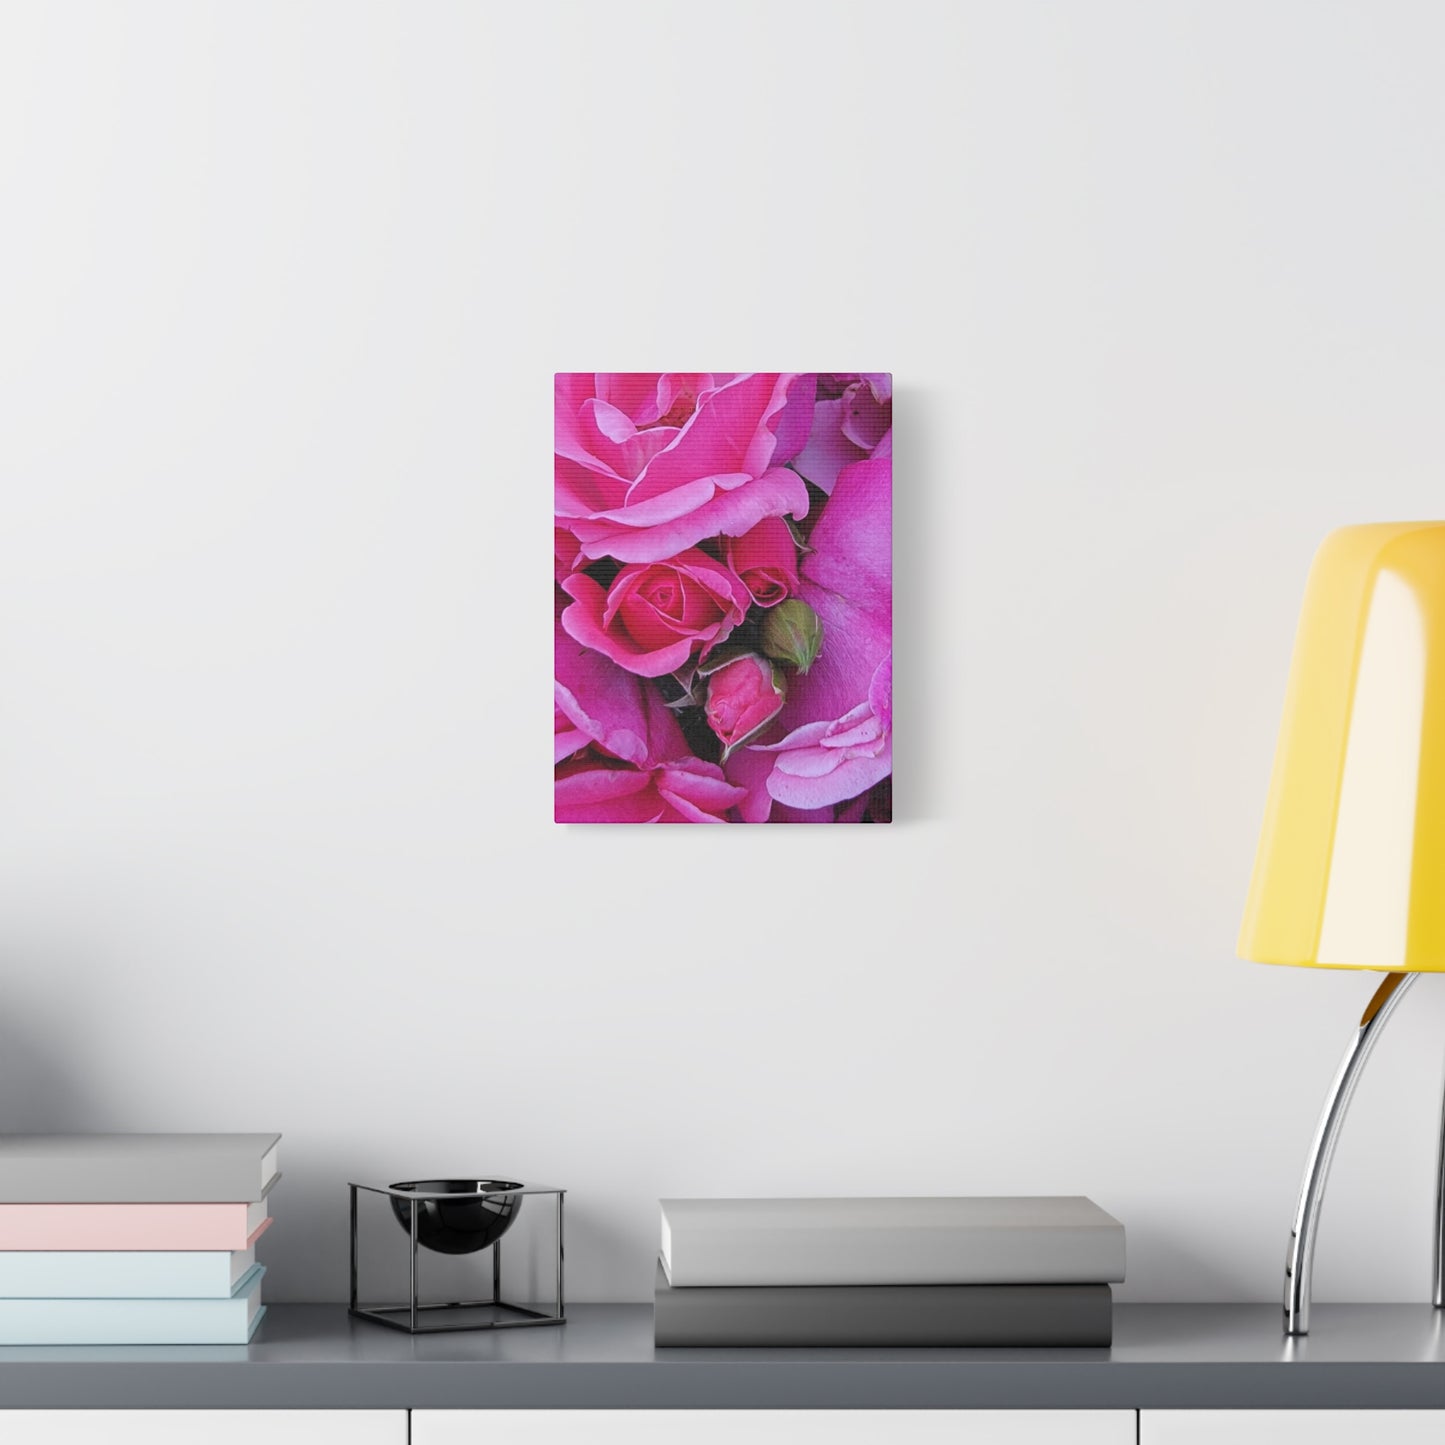 A Rose By Any Other Name, Matte Canvas, Stretched, 1.25"